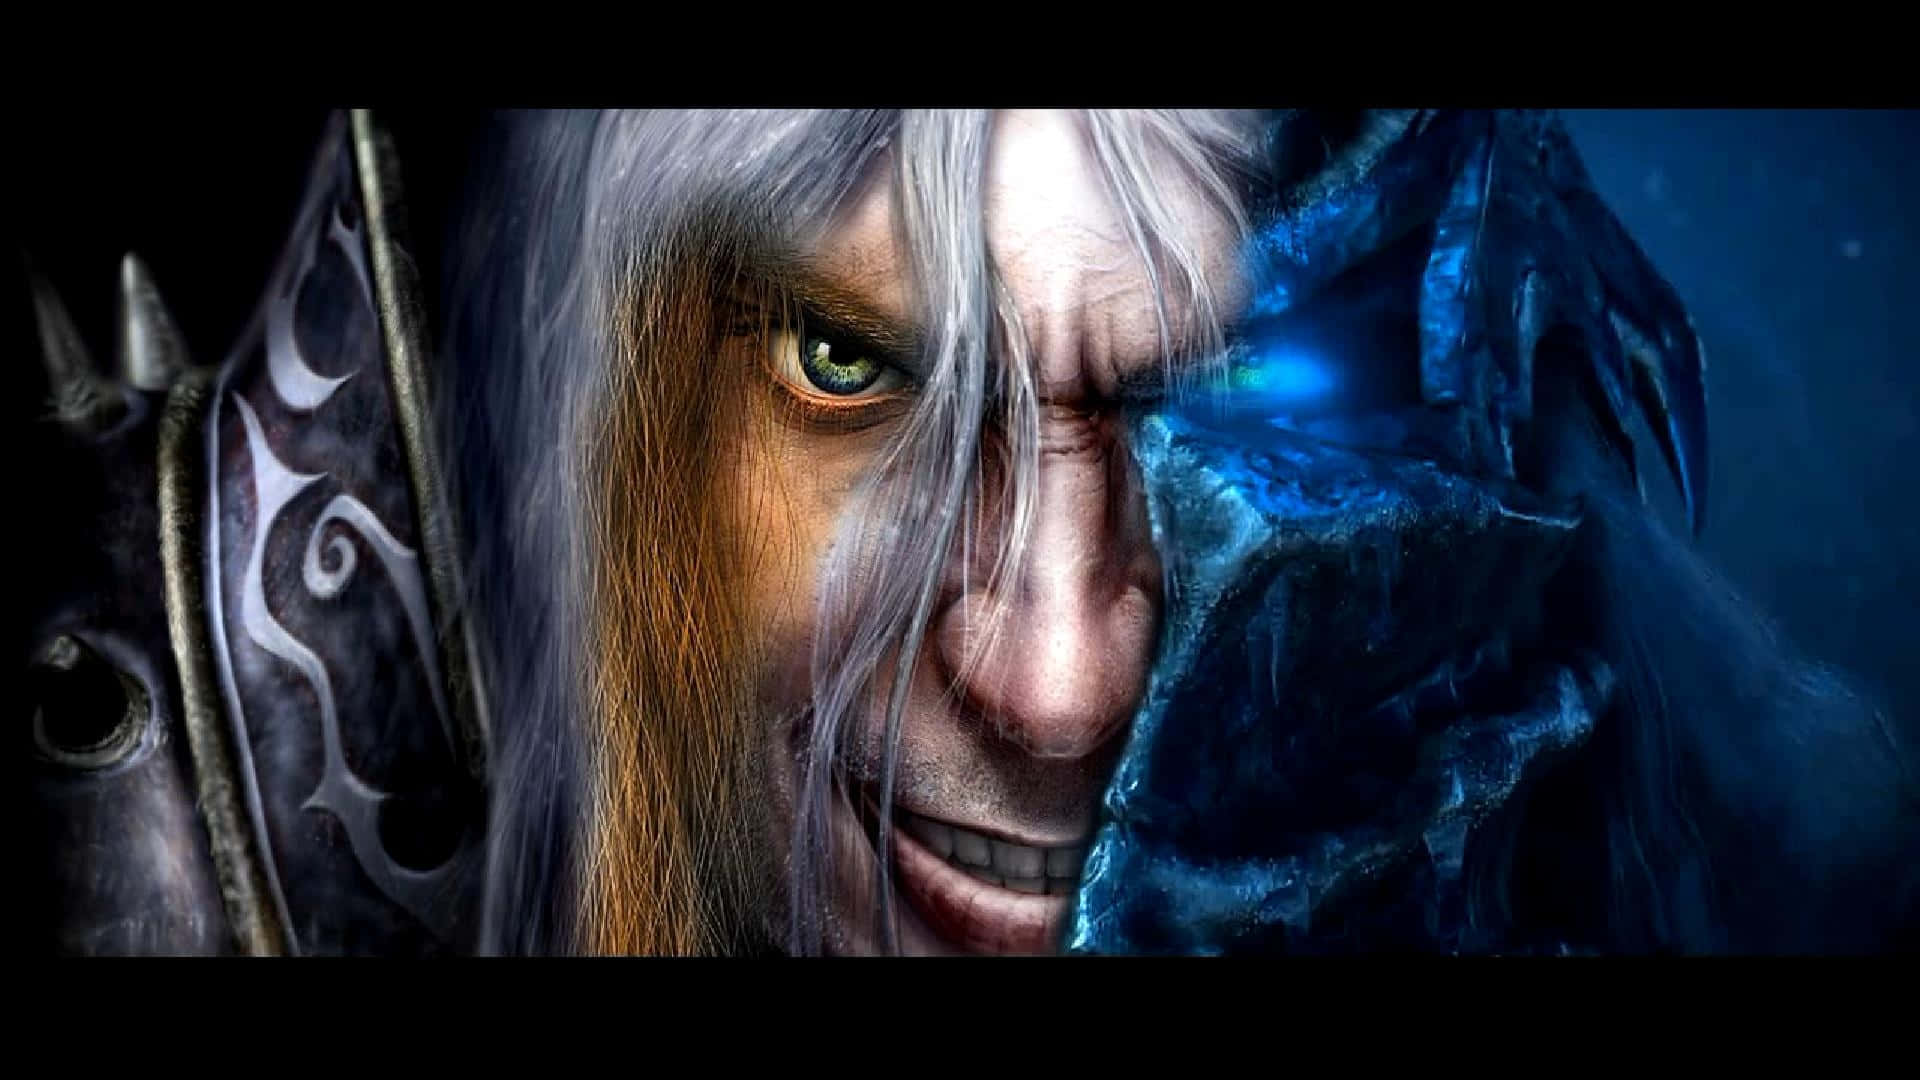 "arthas Menethil, The Lich King Ruling Over The Frozen Wasteland" Wallpaper